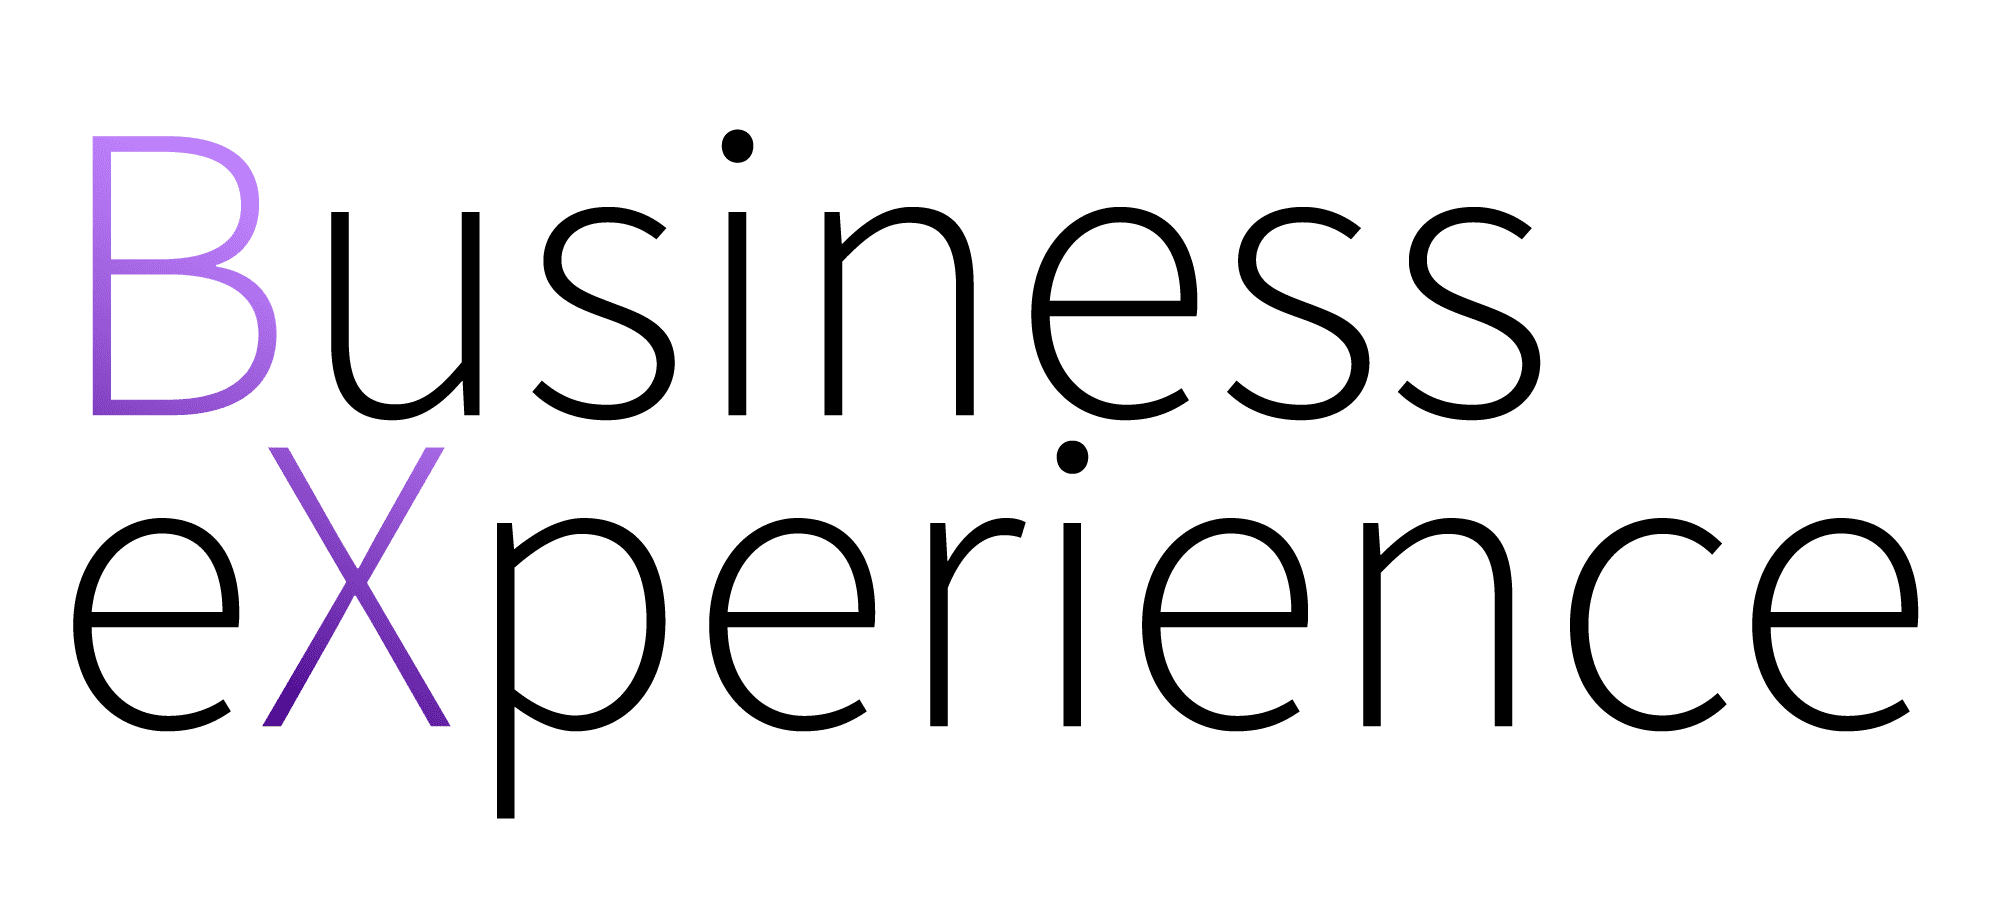 business experience